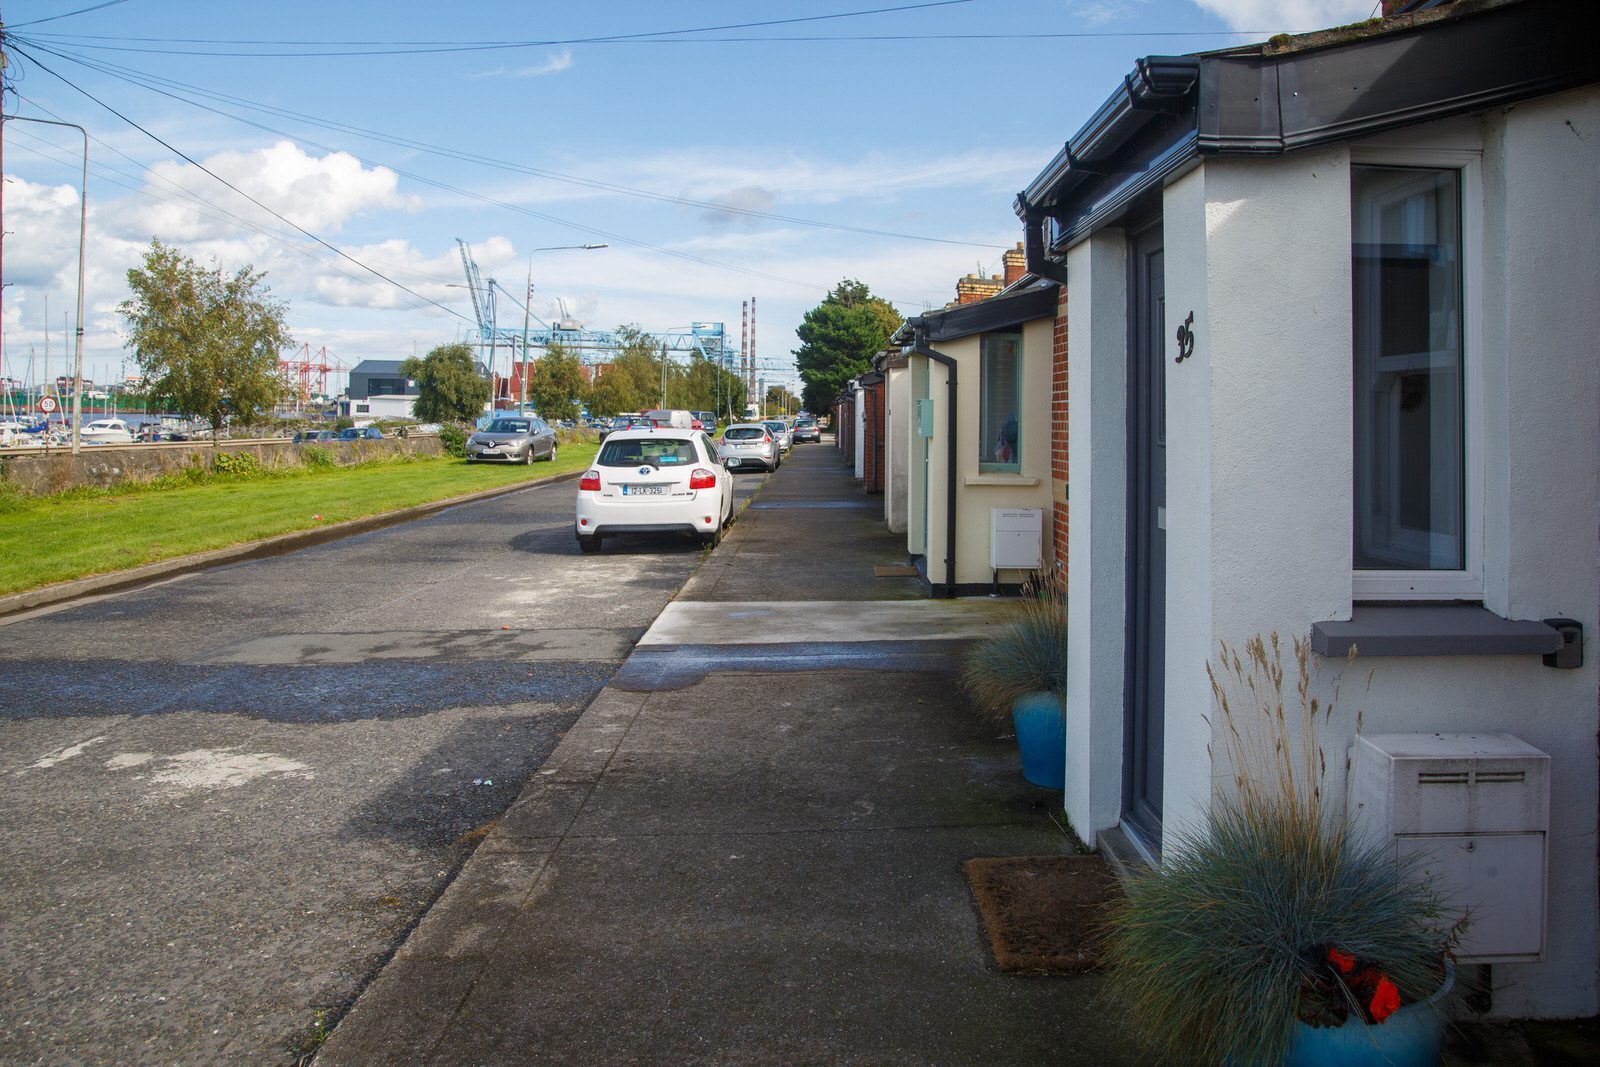 PIGEON HOUSE ROAD IN RINGSEND [IS A COMPLEX OF STREETS RATHER THAN A SINGLE STREET] 006